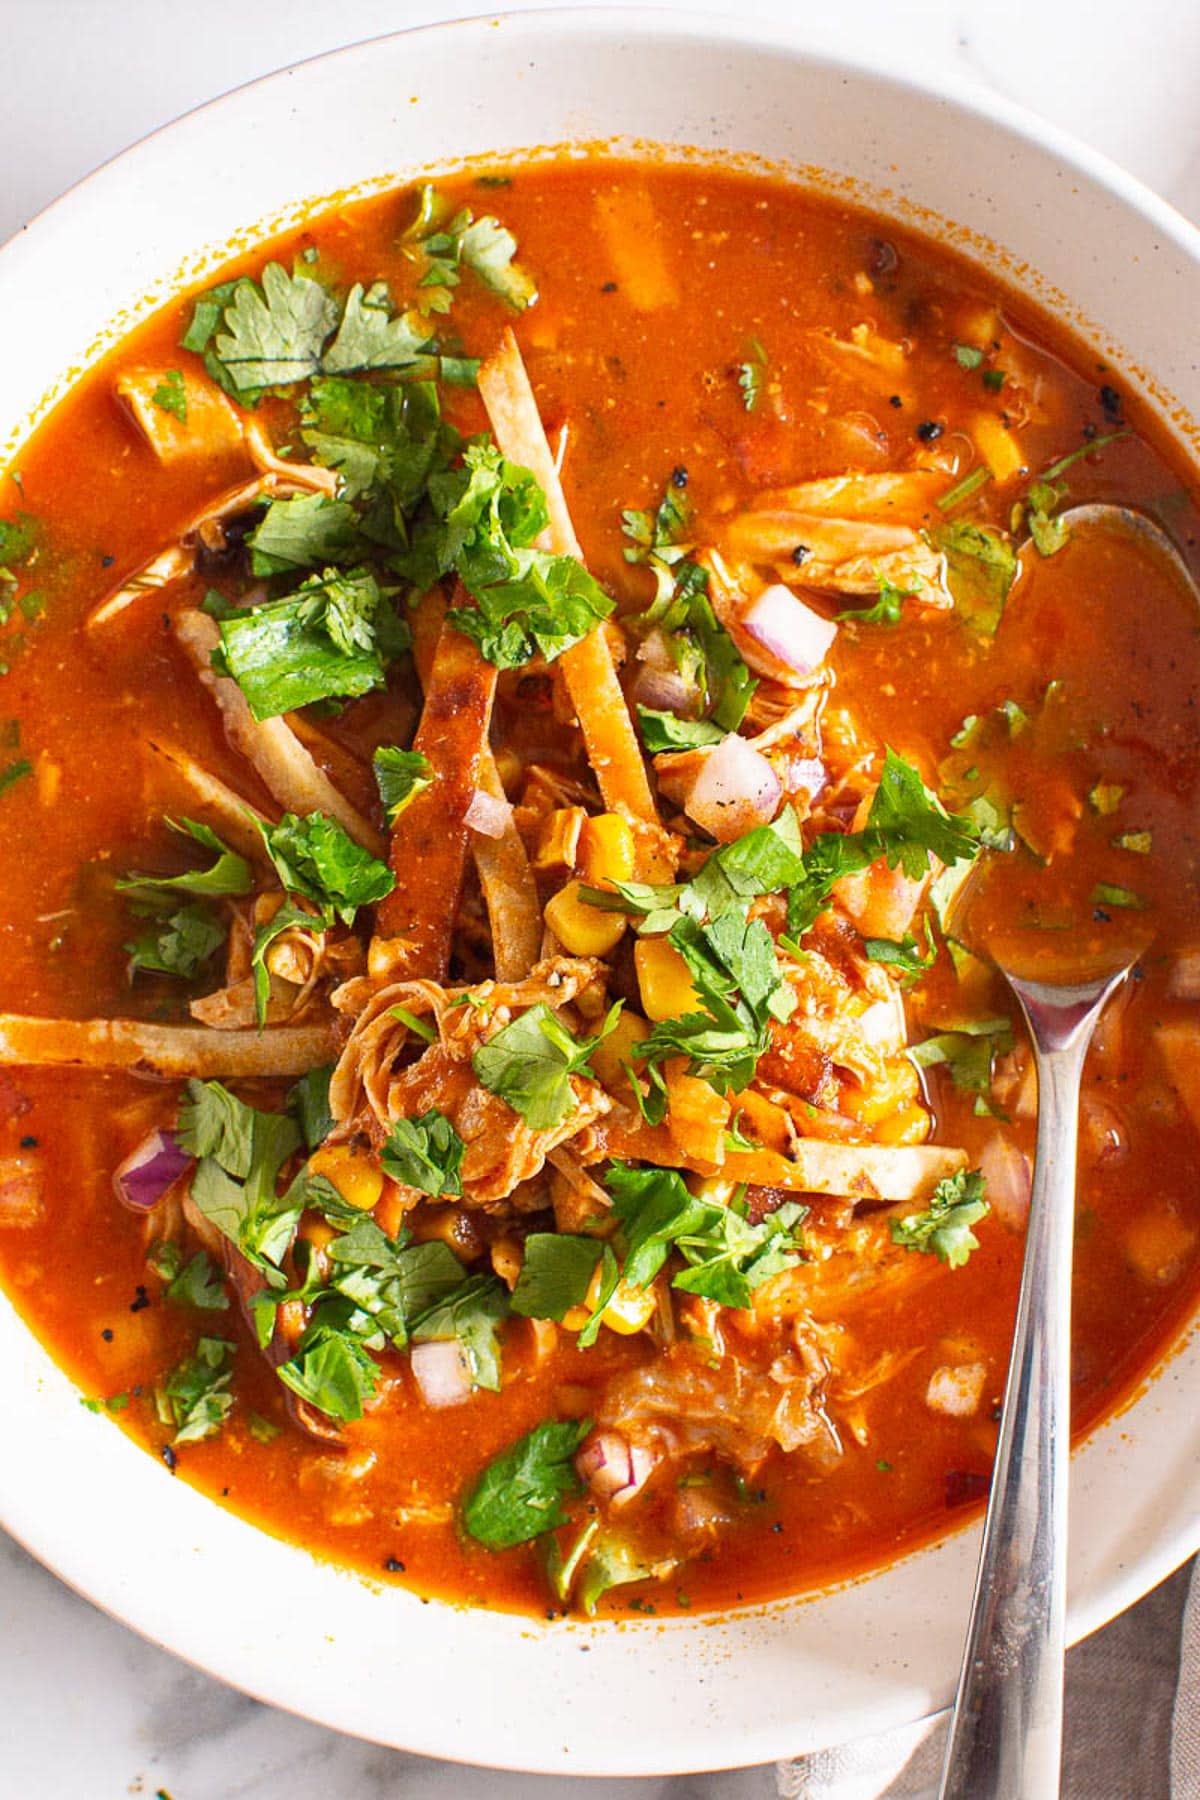  chicken tortilla soup served with tortilla strips, cilantro and red onion in a bowl with a spoon.